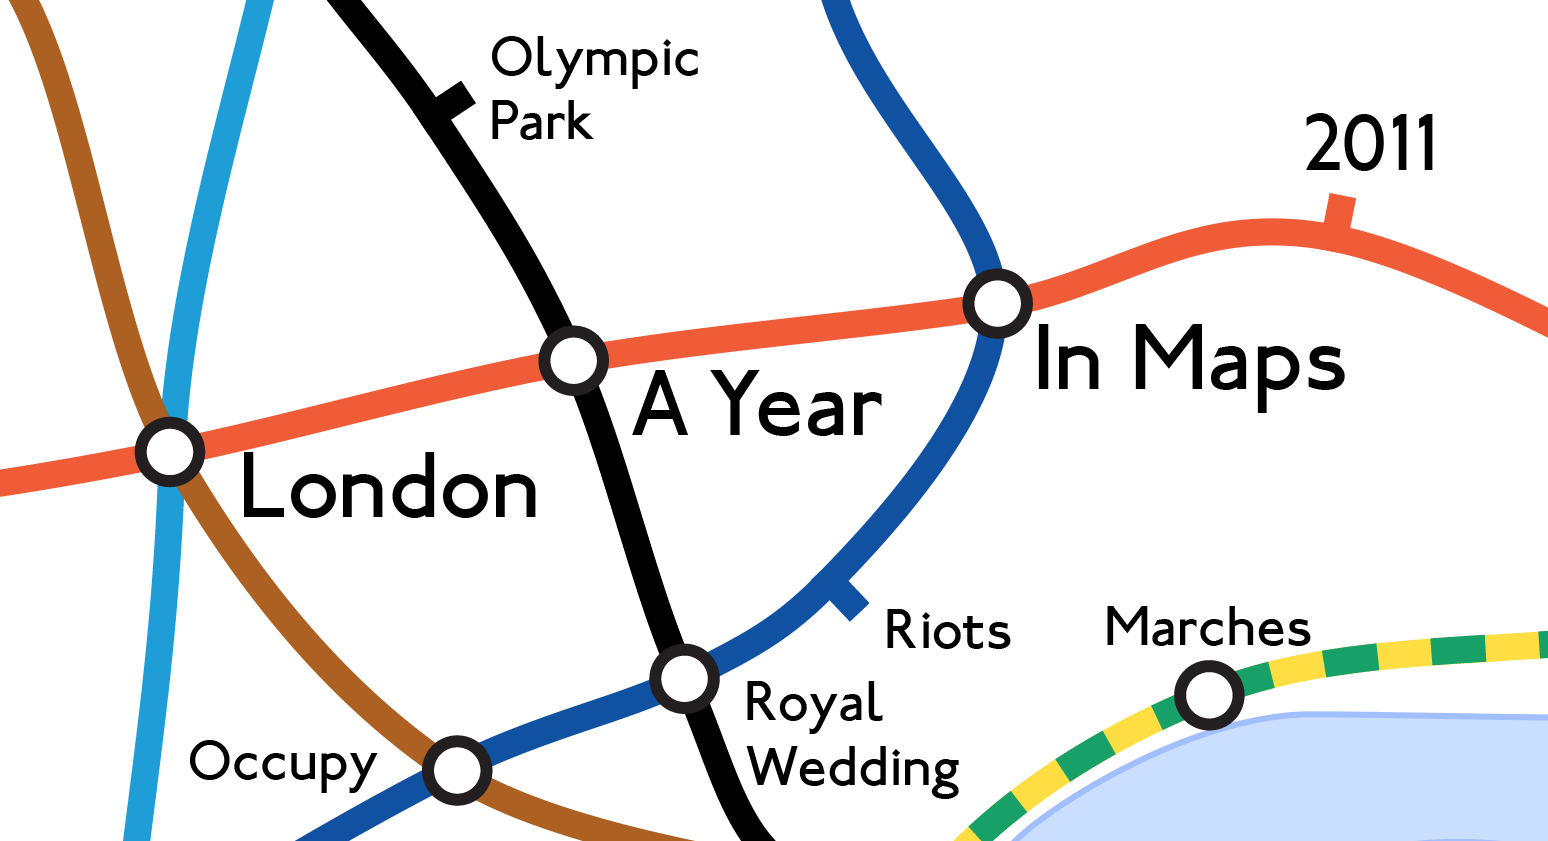 London: A Year in Maps